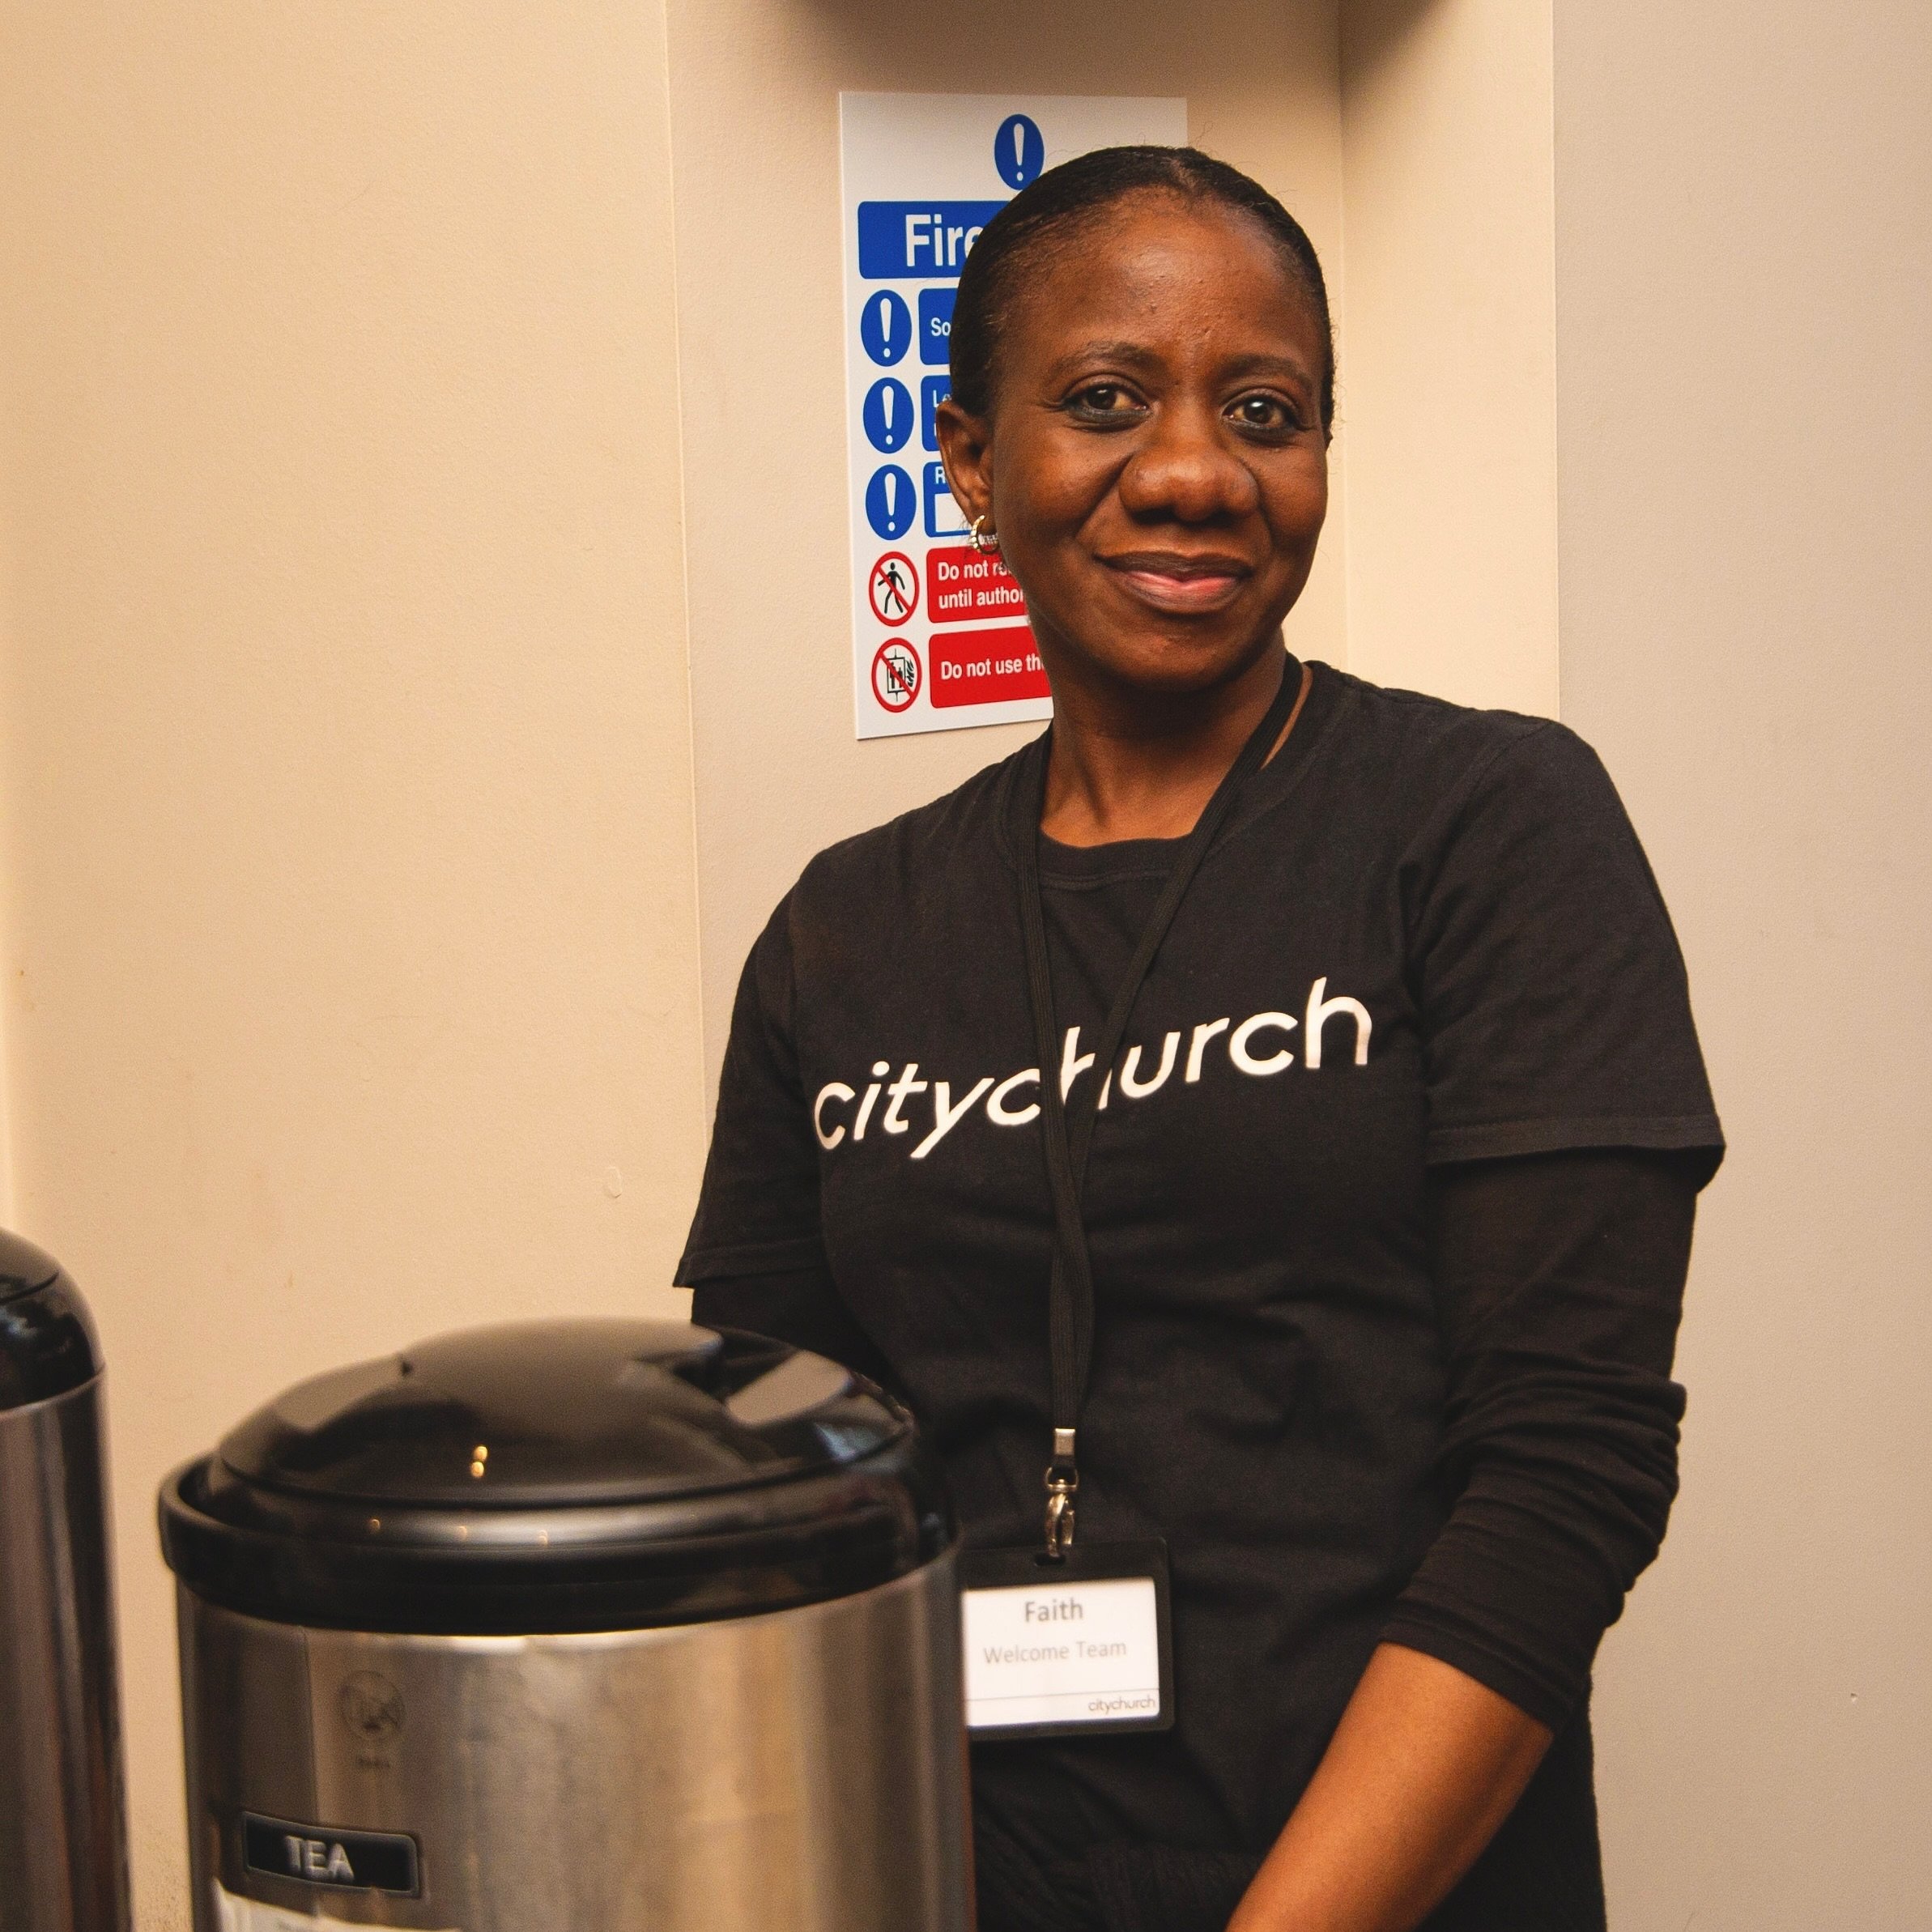 We love our Welcome Team; they help us to feel appreciated and understood when we come in to services - giving directions, assistance, and being a friendly face! Why not join them and serve?  Go to citychurchcardiff.com/serve